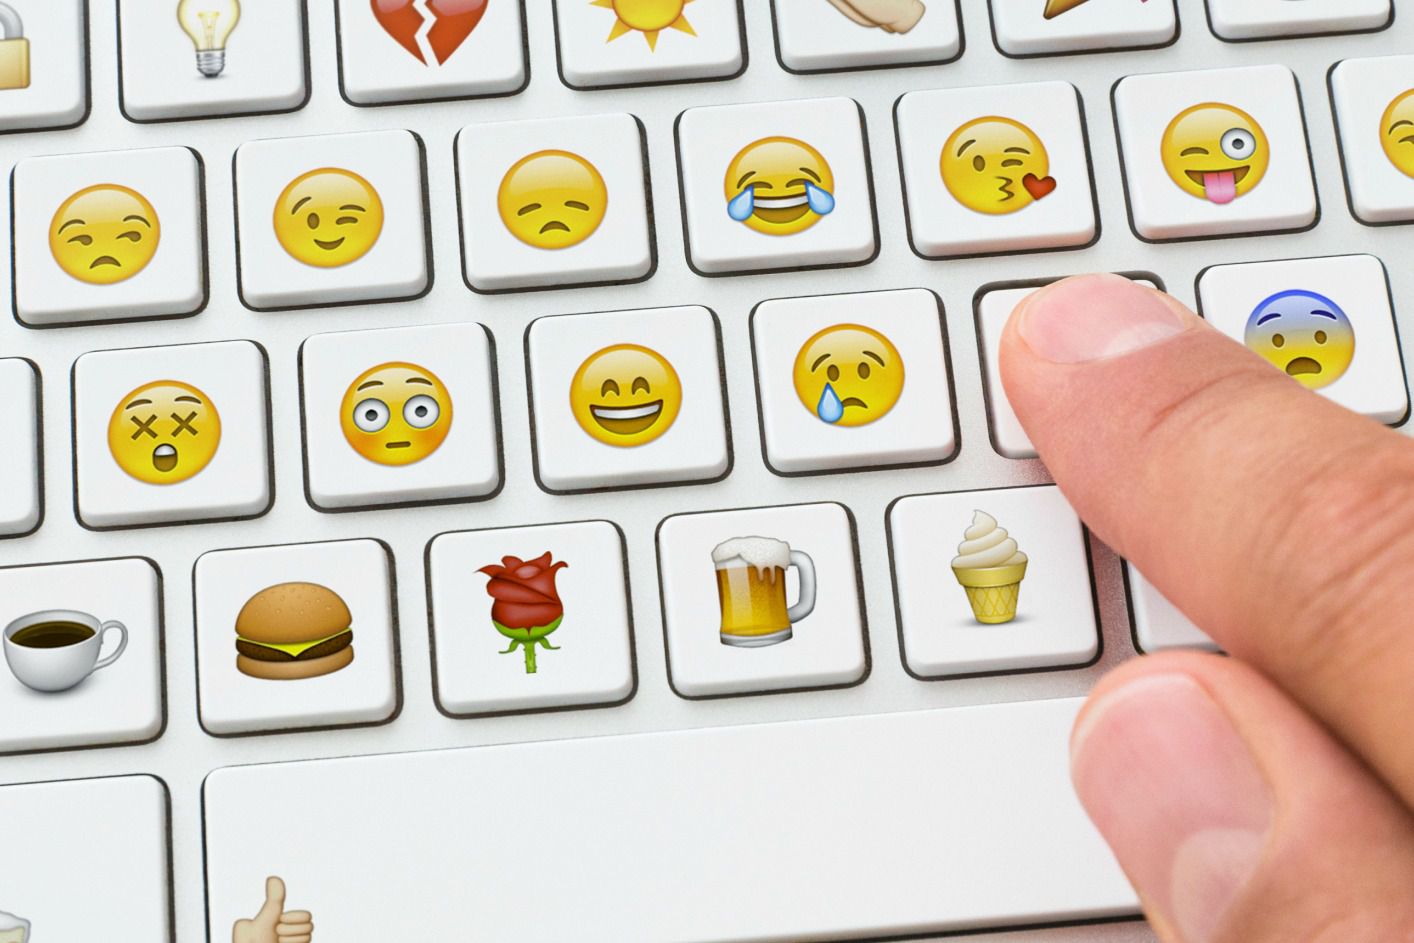 Discover Hidden Facebook Emoticons You’ve Always Wanted To Use